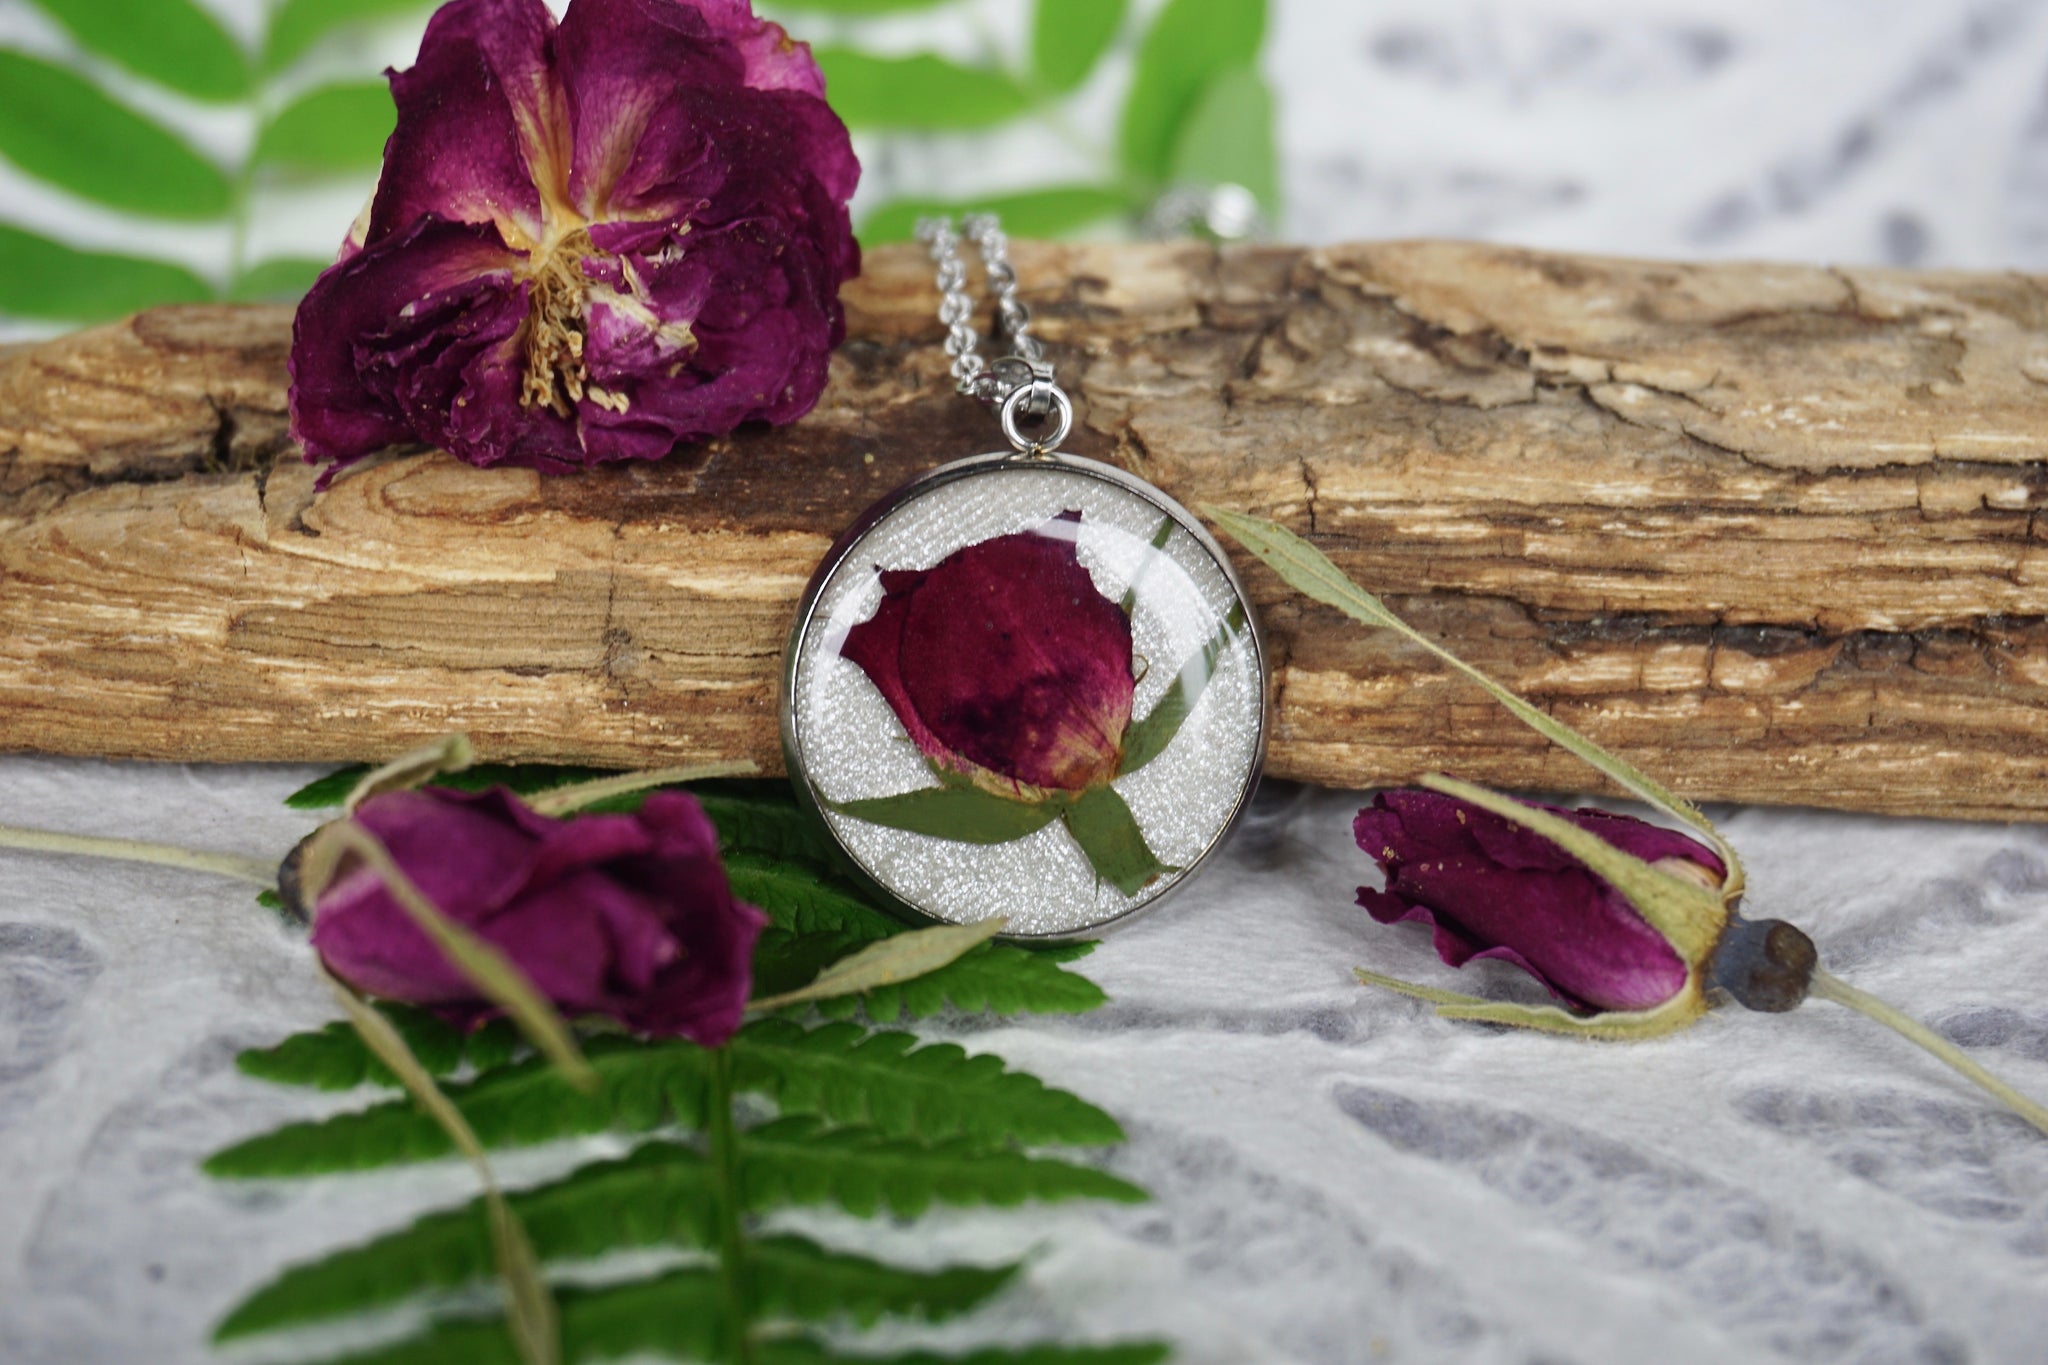 Dried Purple Roses/Dried Flowers/Small Roses/Resin Jewelry/Dried